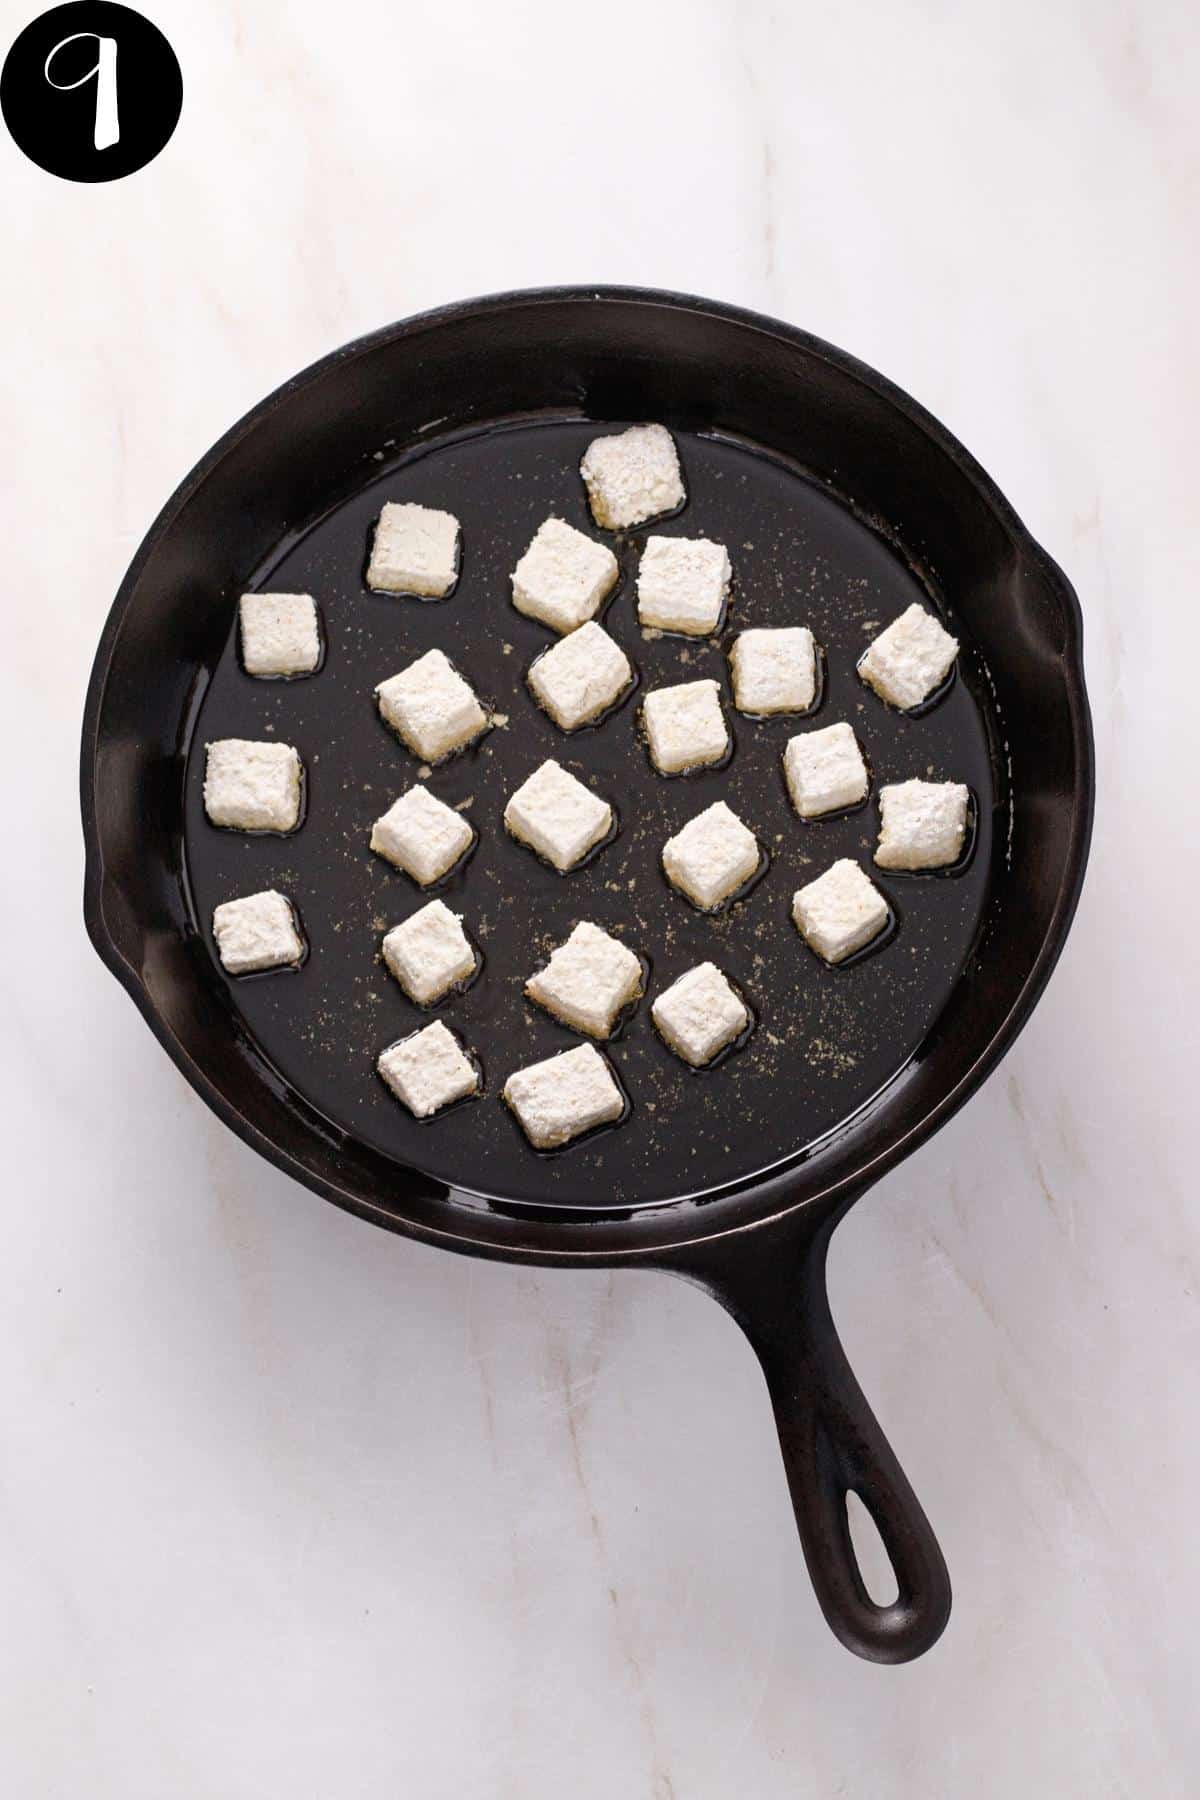 Tofu being shallow fried in a cast iron skillet.